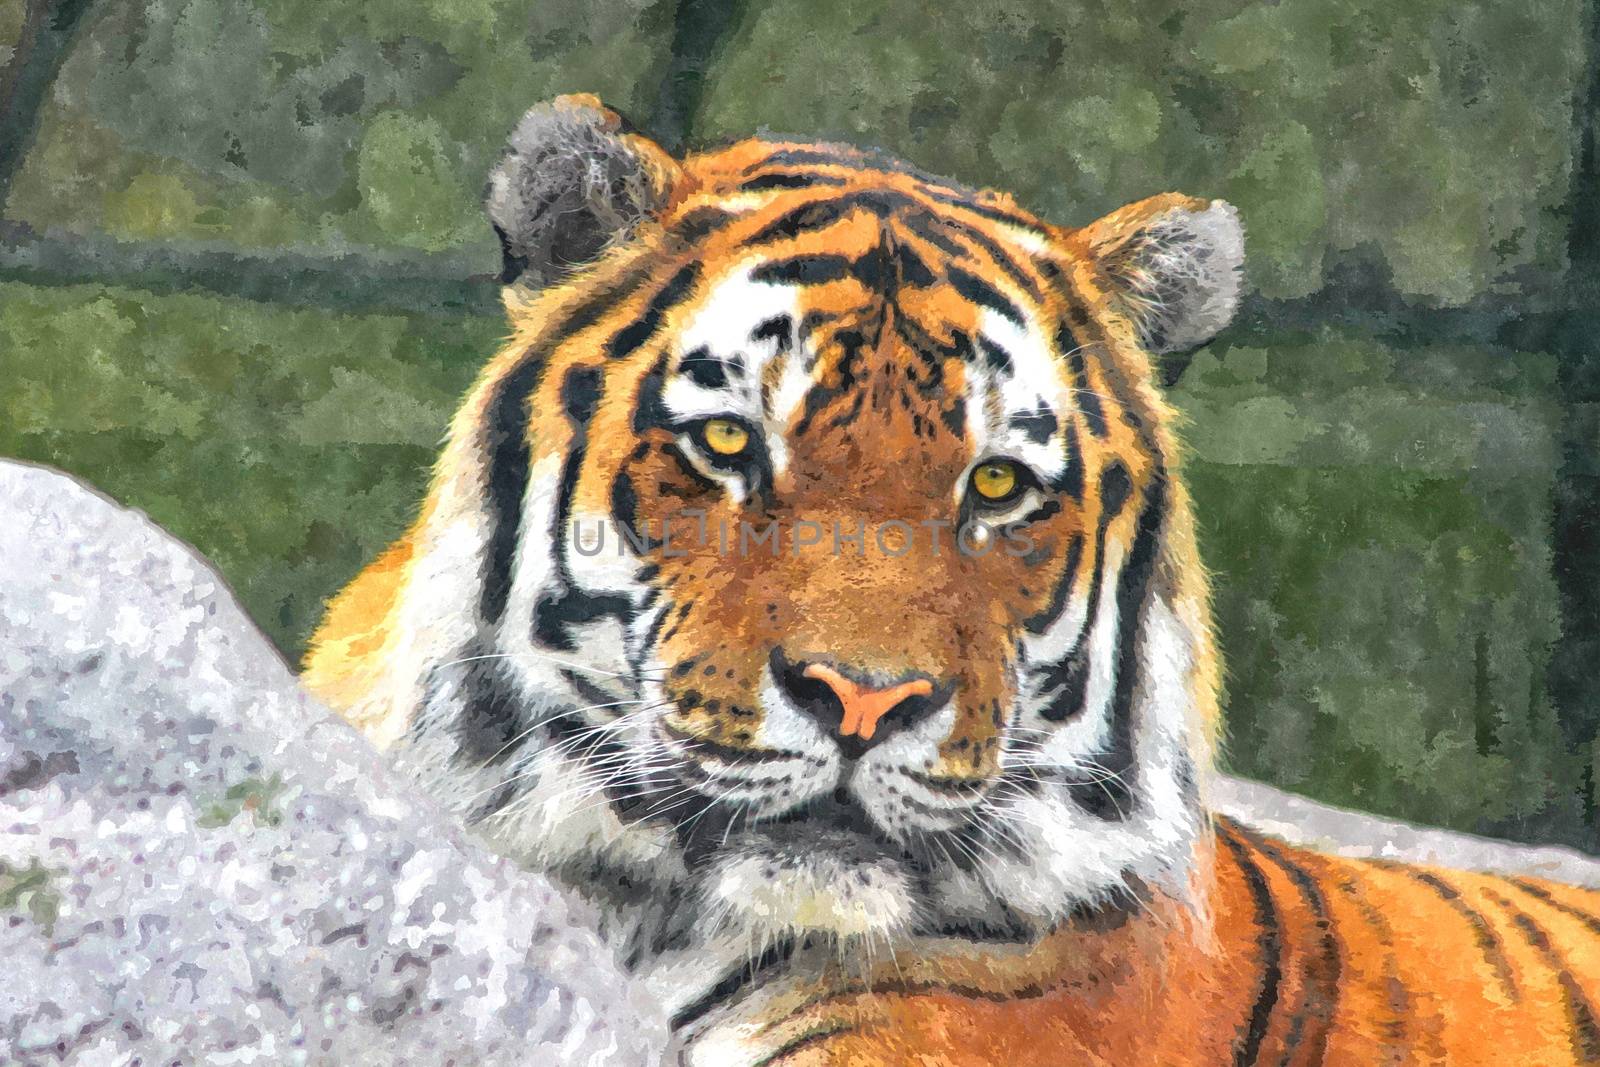 beautiful amur tiger that is critically endangered. Water color manipulation.